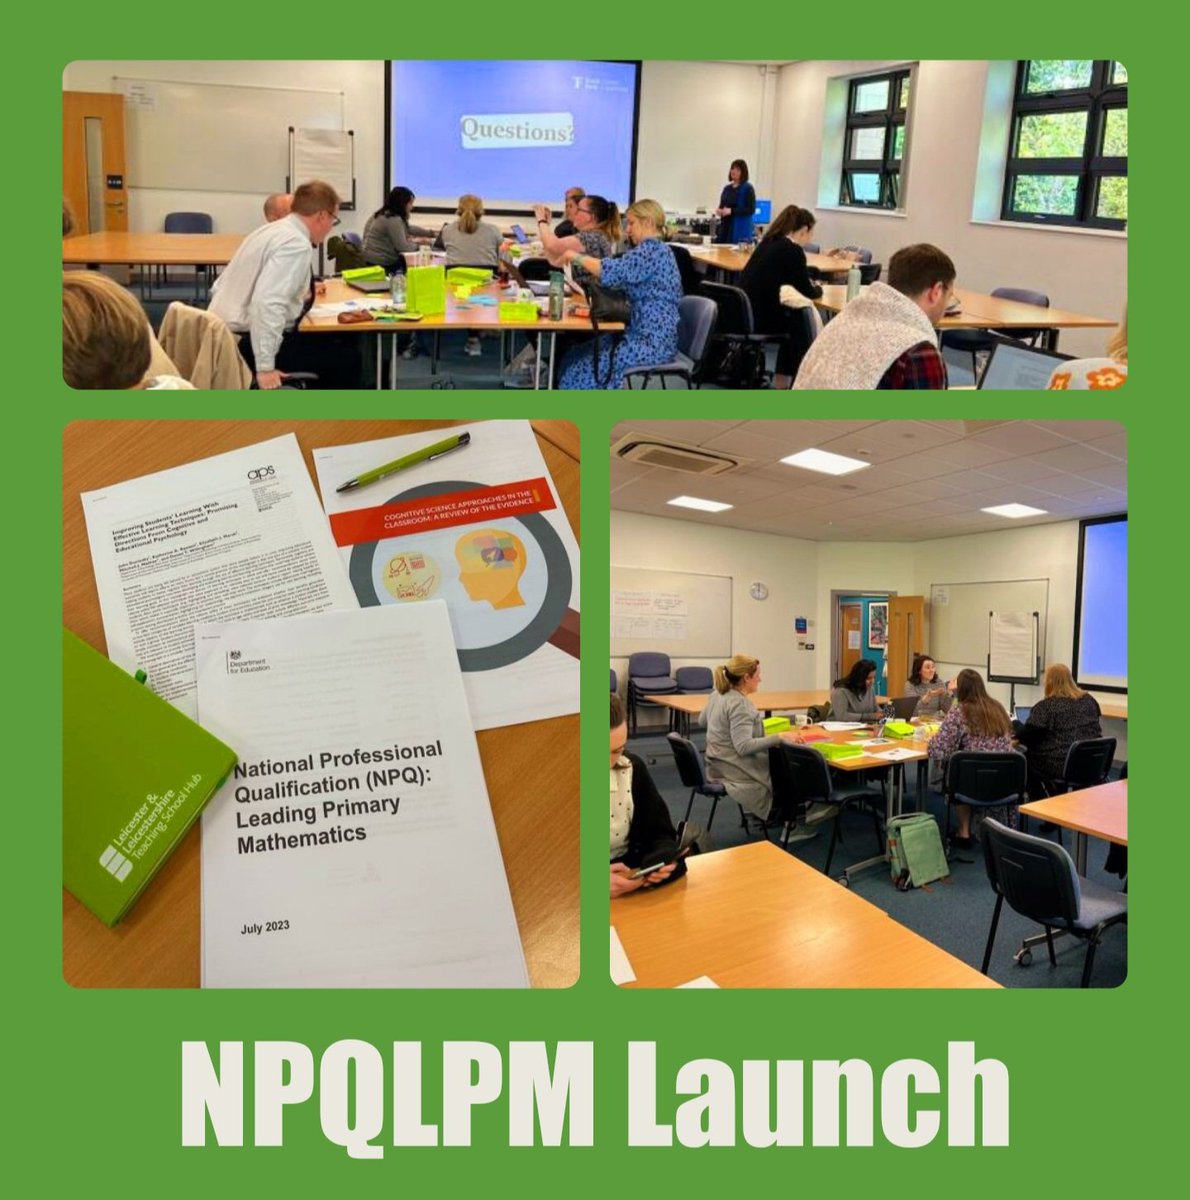 This afternoon, we launched our inaugural cohort of the @TeachFirst NPQ for Leading Primary Maths! Expertly led by @kellisSCITTDDir and @StuartYvonne, there was a buzz in the room! #NPQLPM